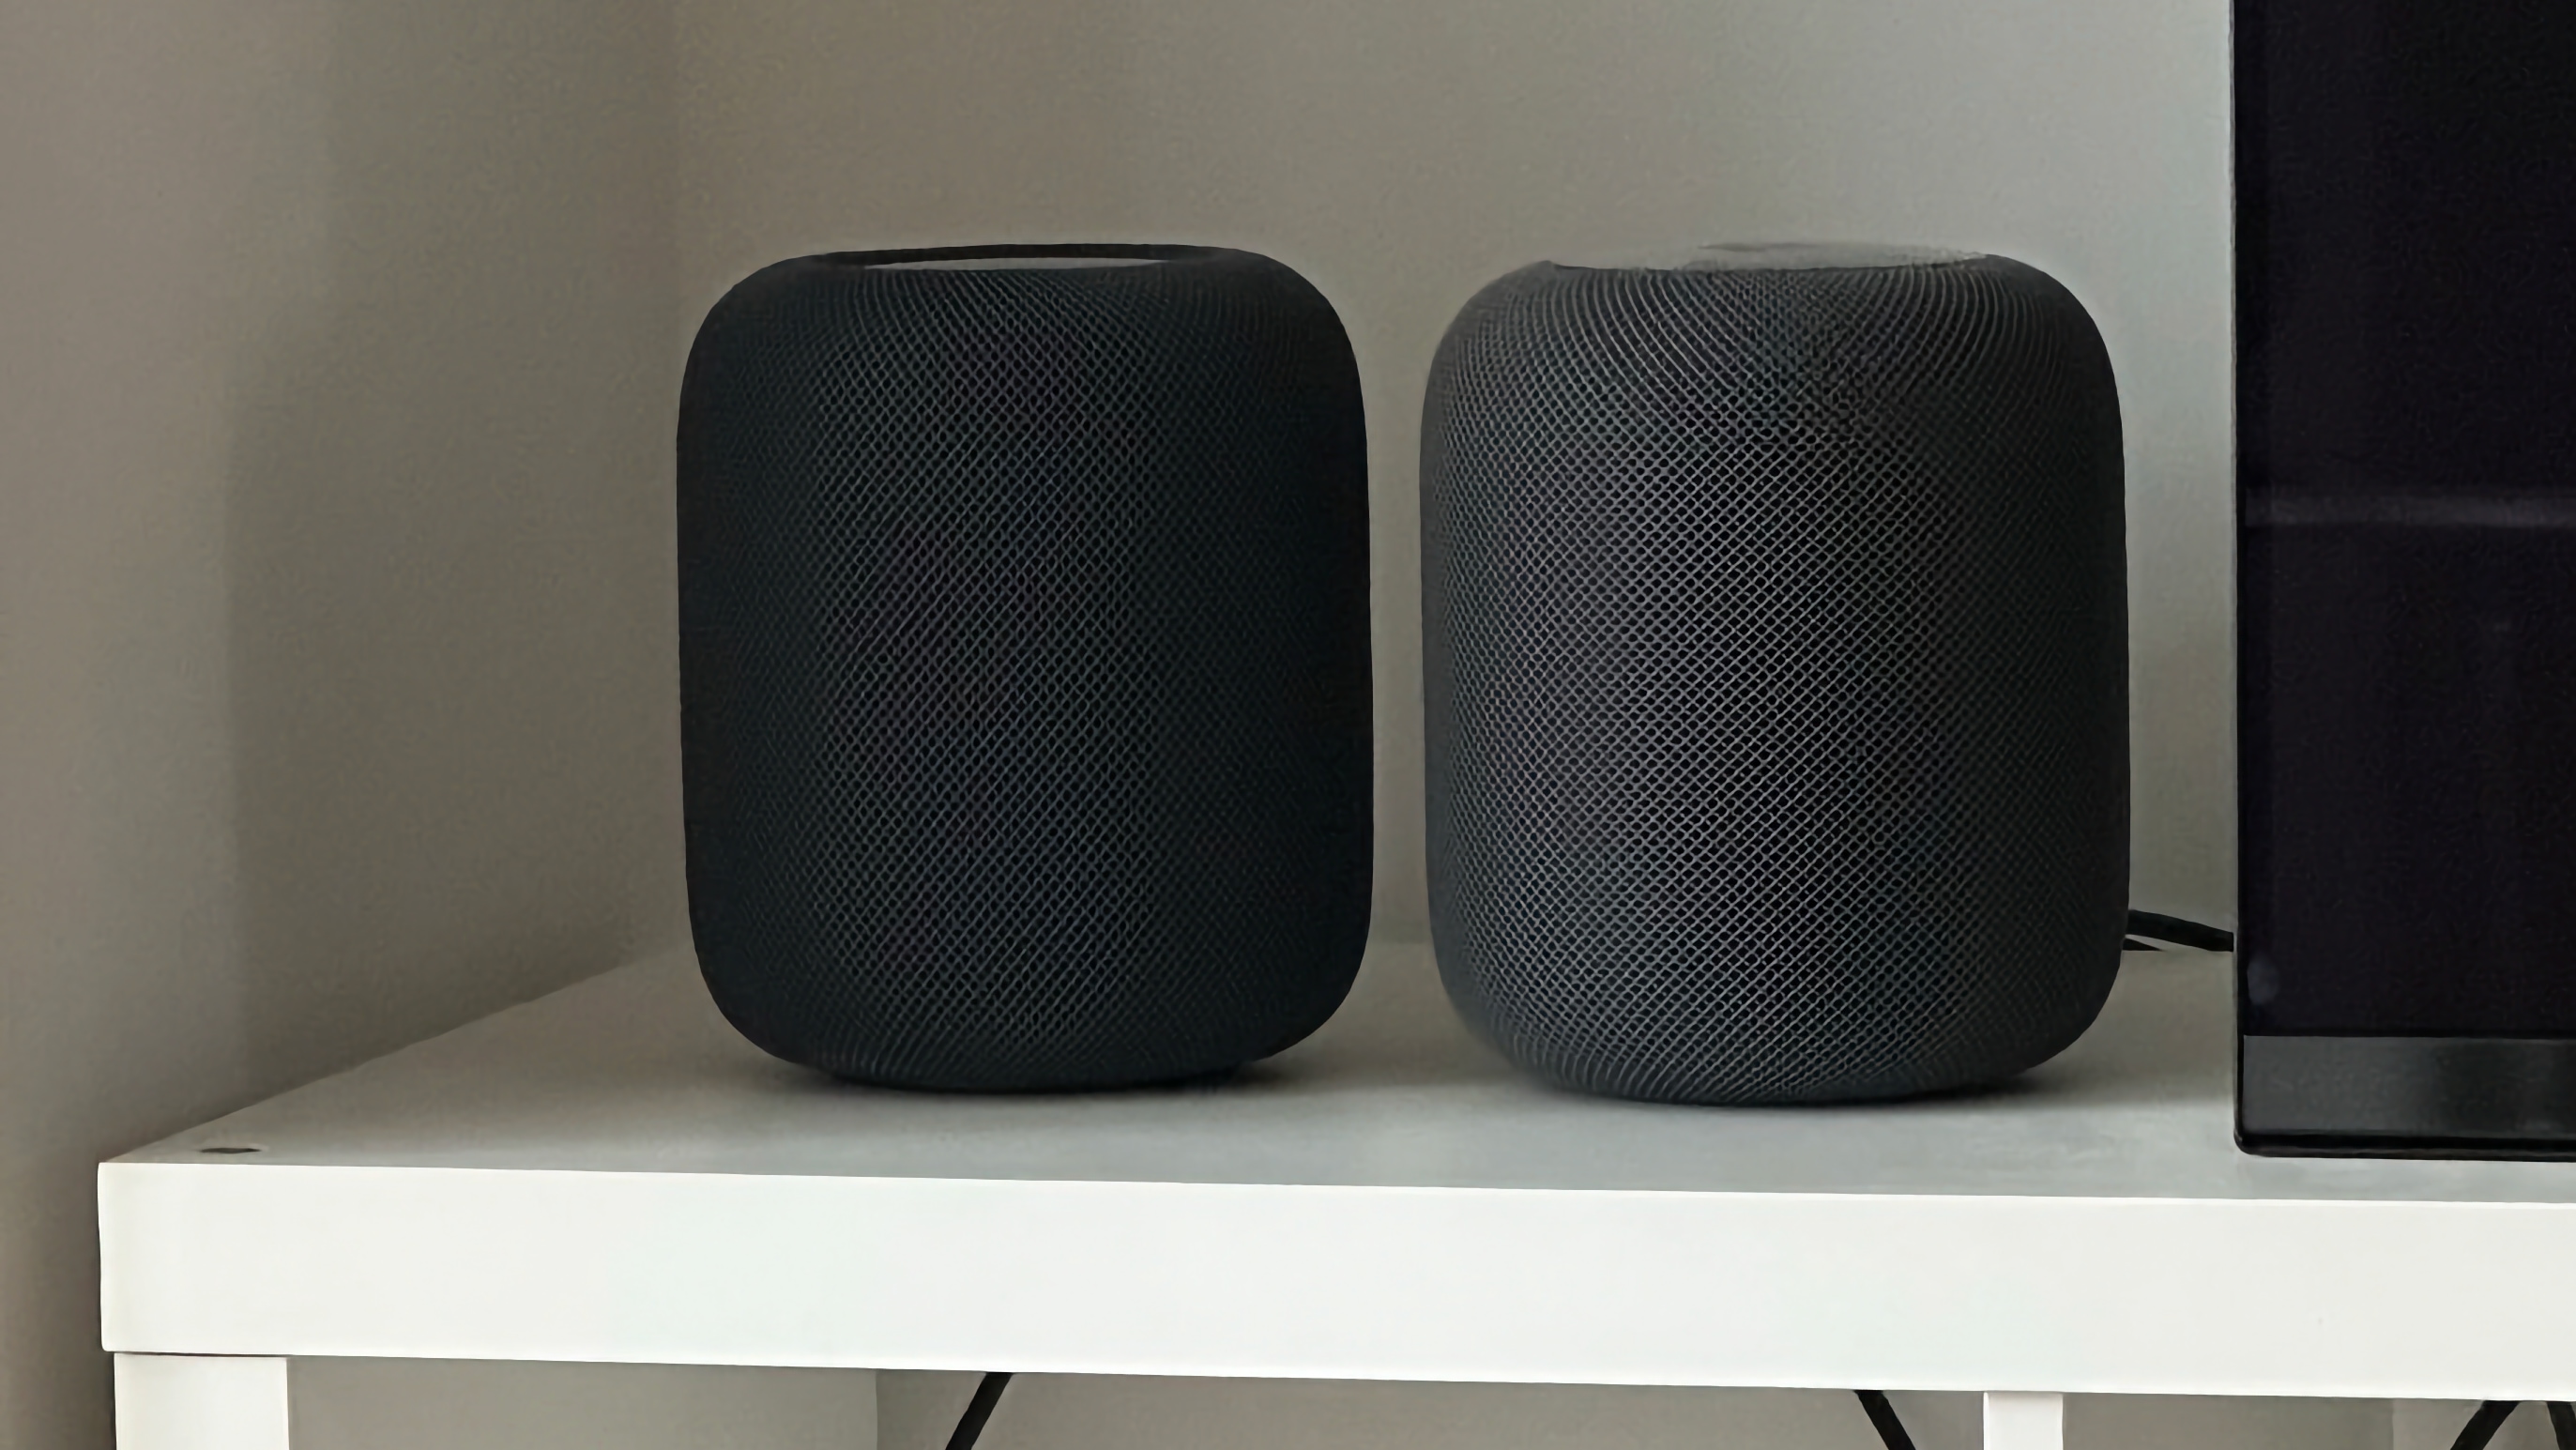 Hands-on: The new HomePod compared to the original - 9to5Mac